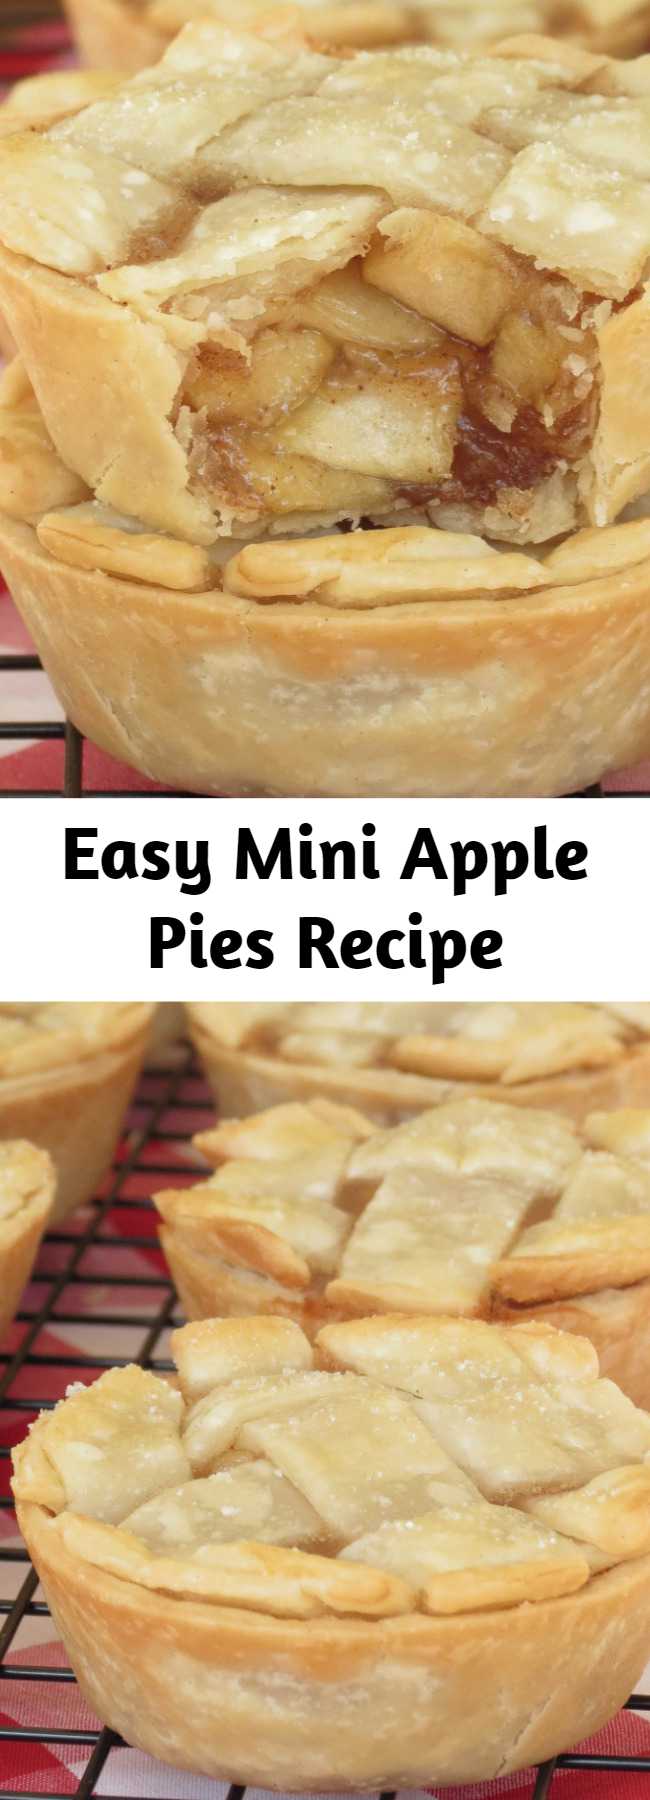 Easy Mini Apple Pies Recipe - These adorable little pies are super easy to make and the filling is so delicious, everyone will love them!